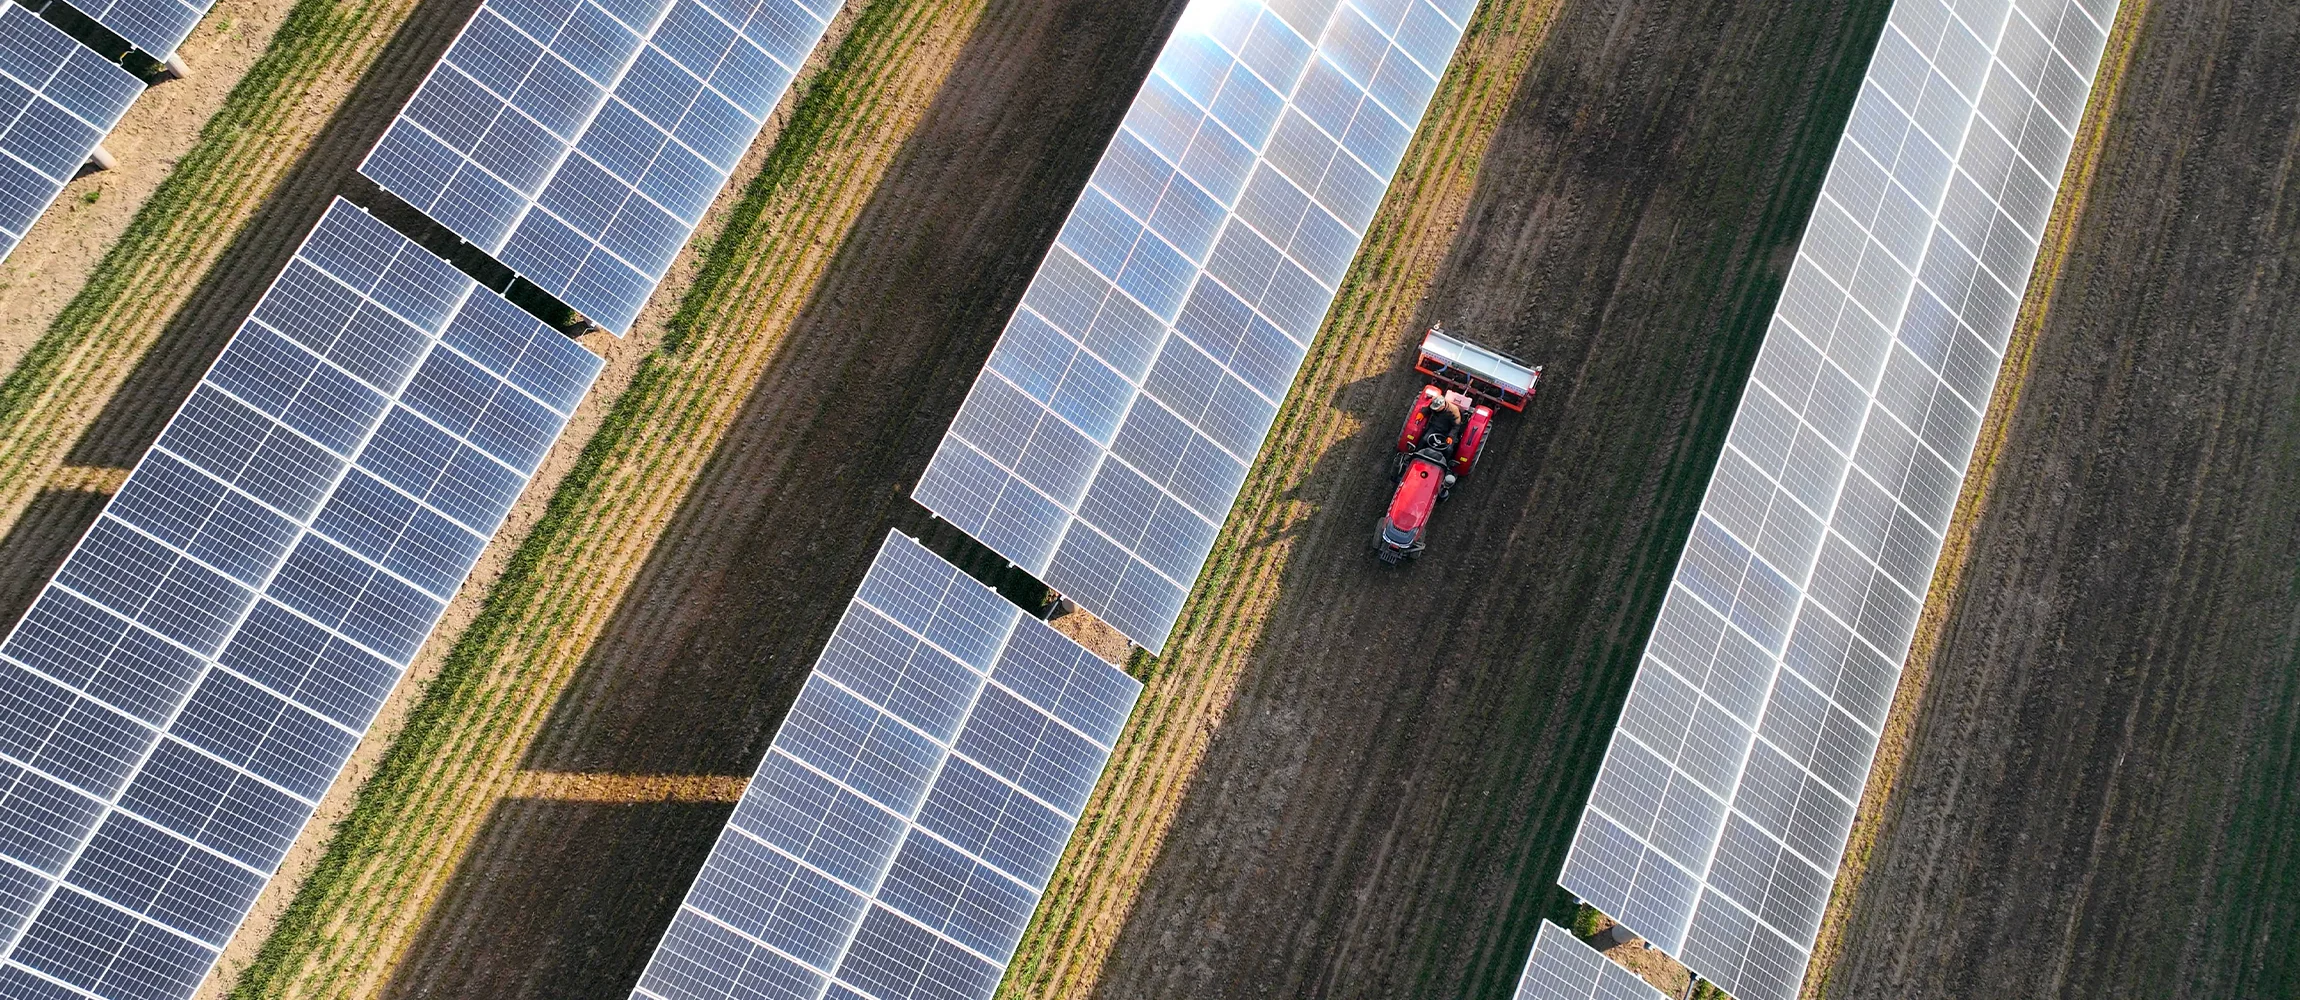 Farming under panels can be difficult where large machinery is needed. Here, a farmer fertilises a wheat field under a photovoltaic panel in Liaocheng, China. (Photo by Zhang Zhenxiang/VCG via Getty Images)